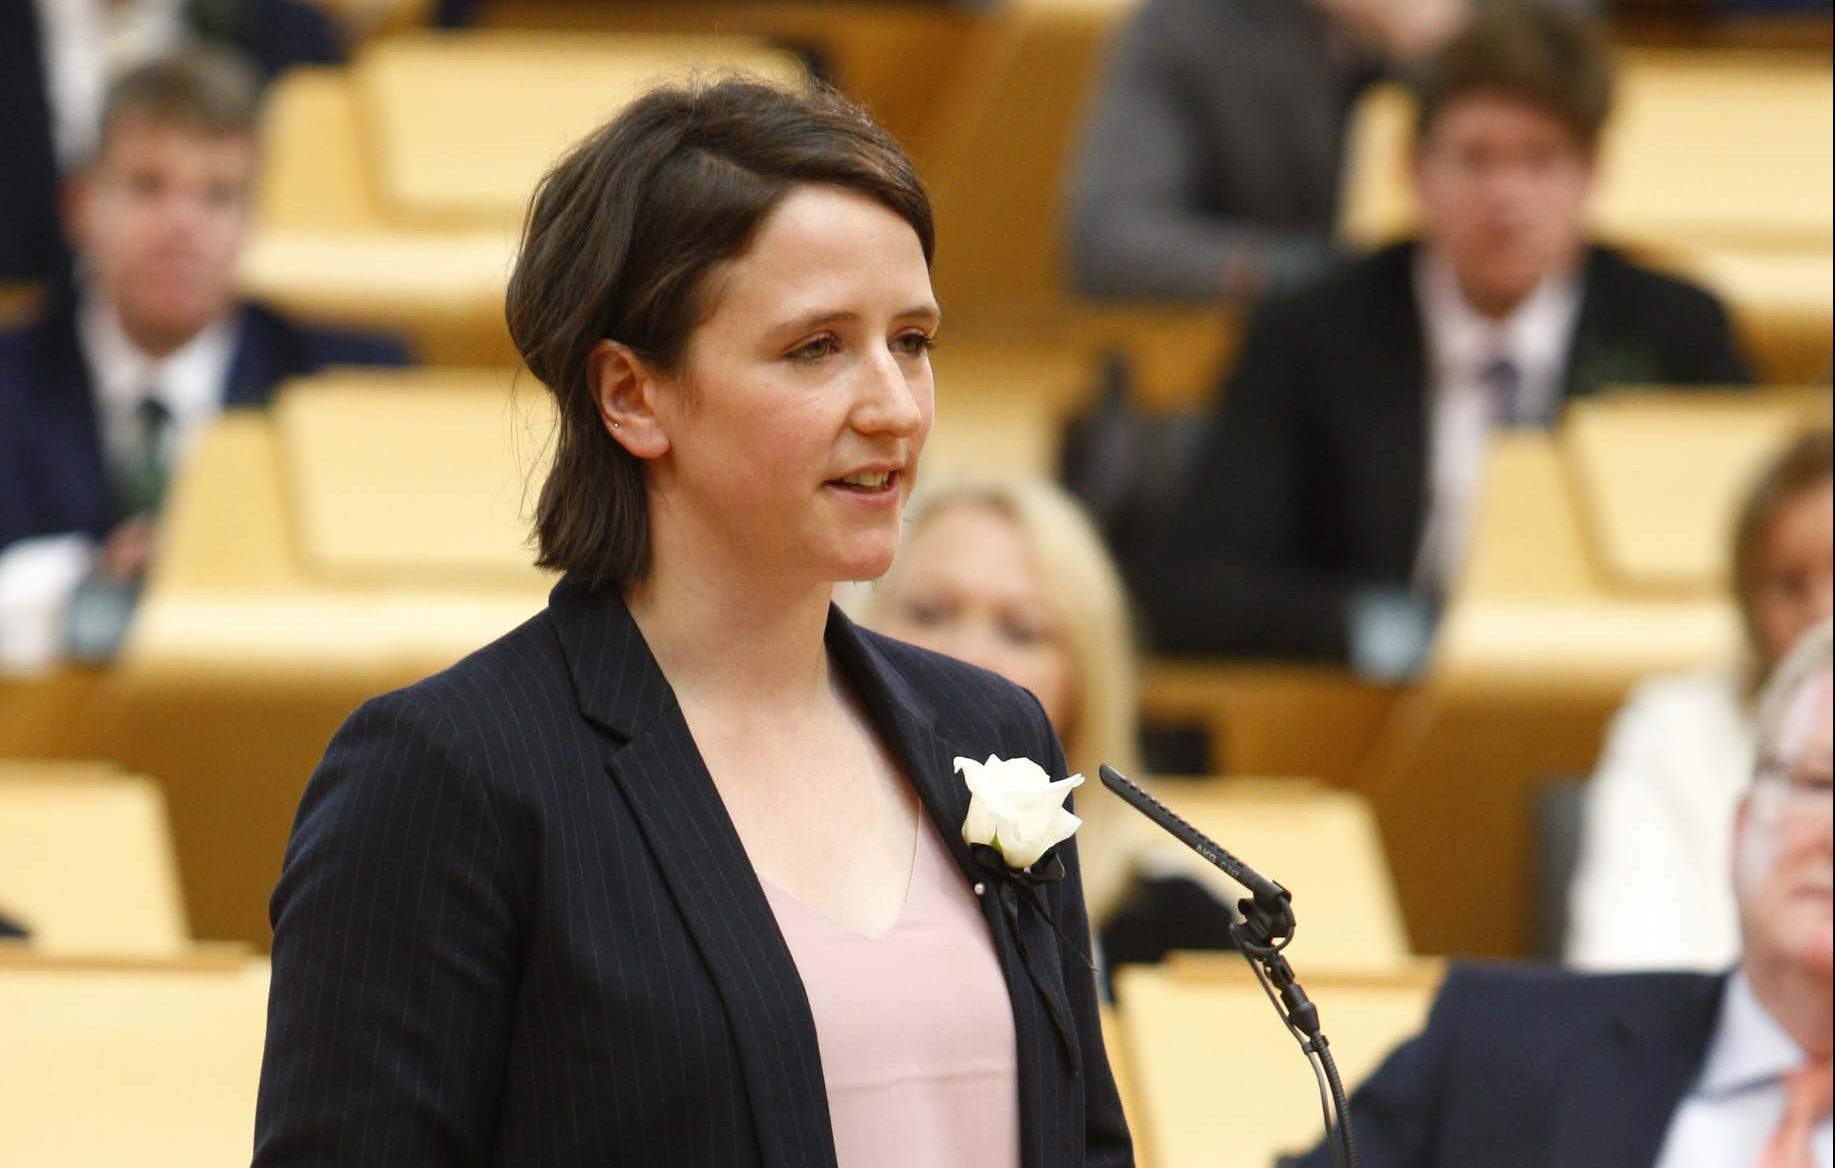 Mairi Evans was elected as North Angus and Mearns MSP last month.